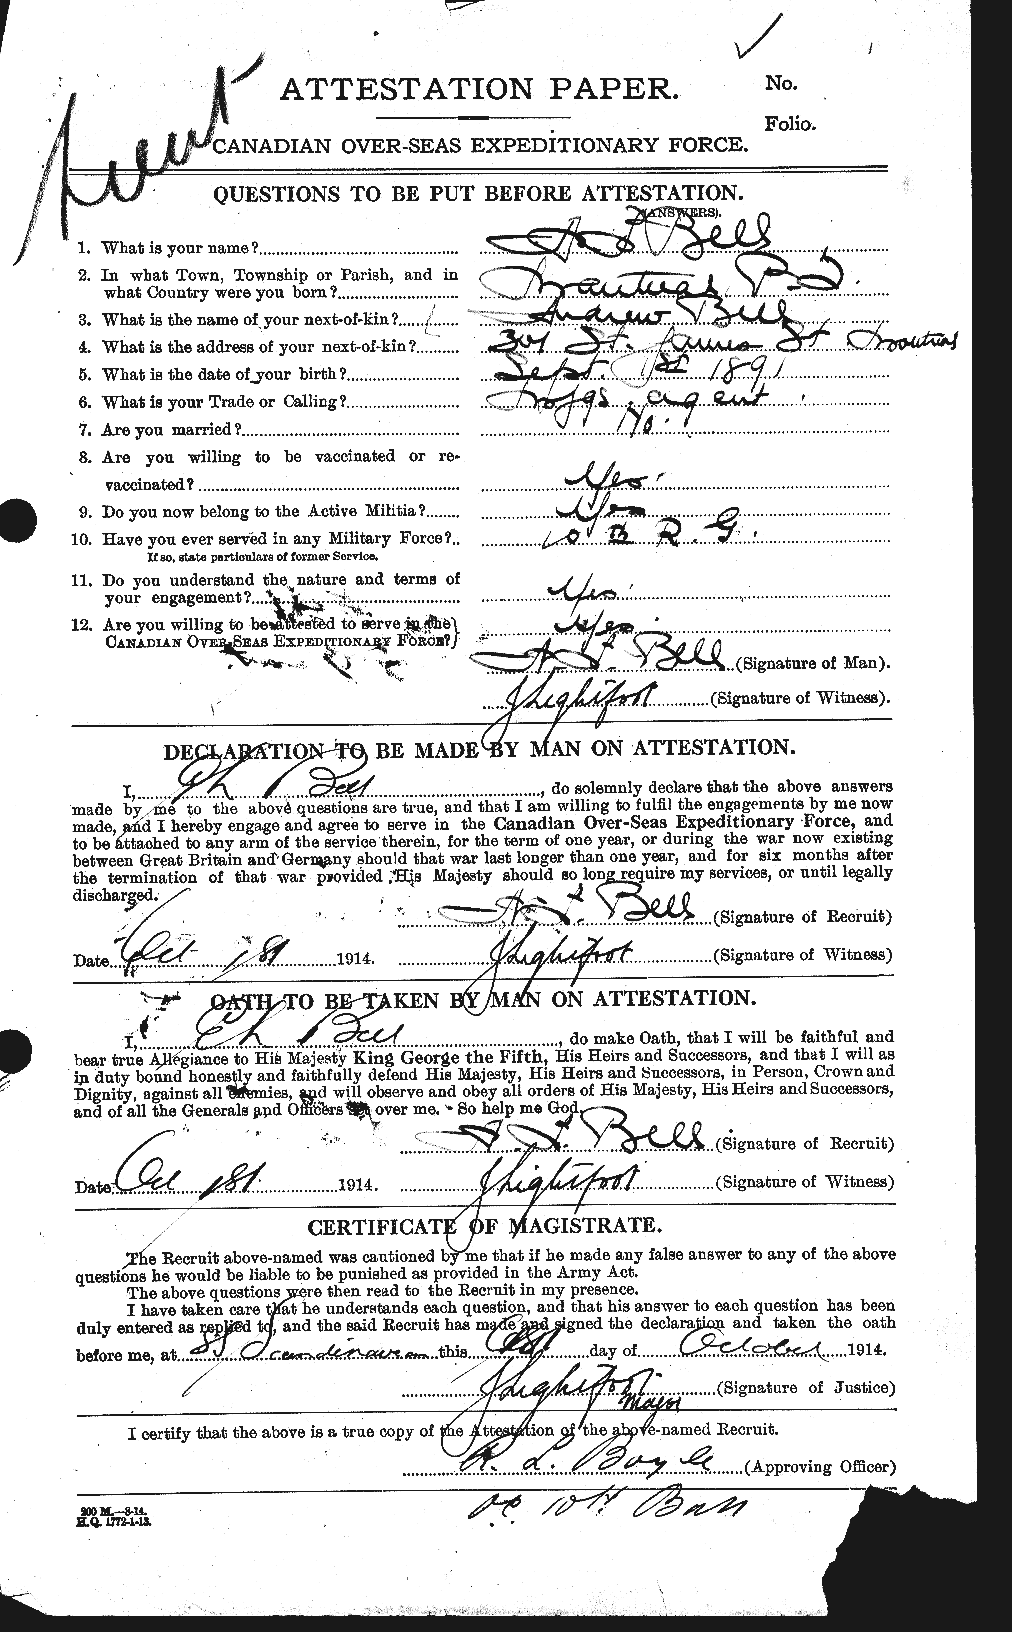 Personnel Records of the First World War - CEF 230096a